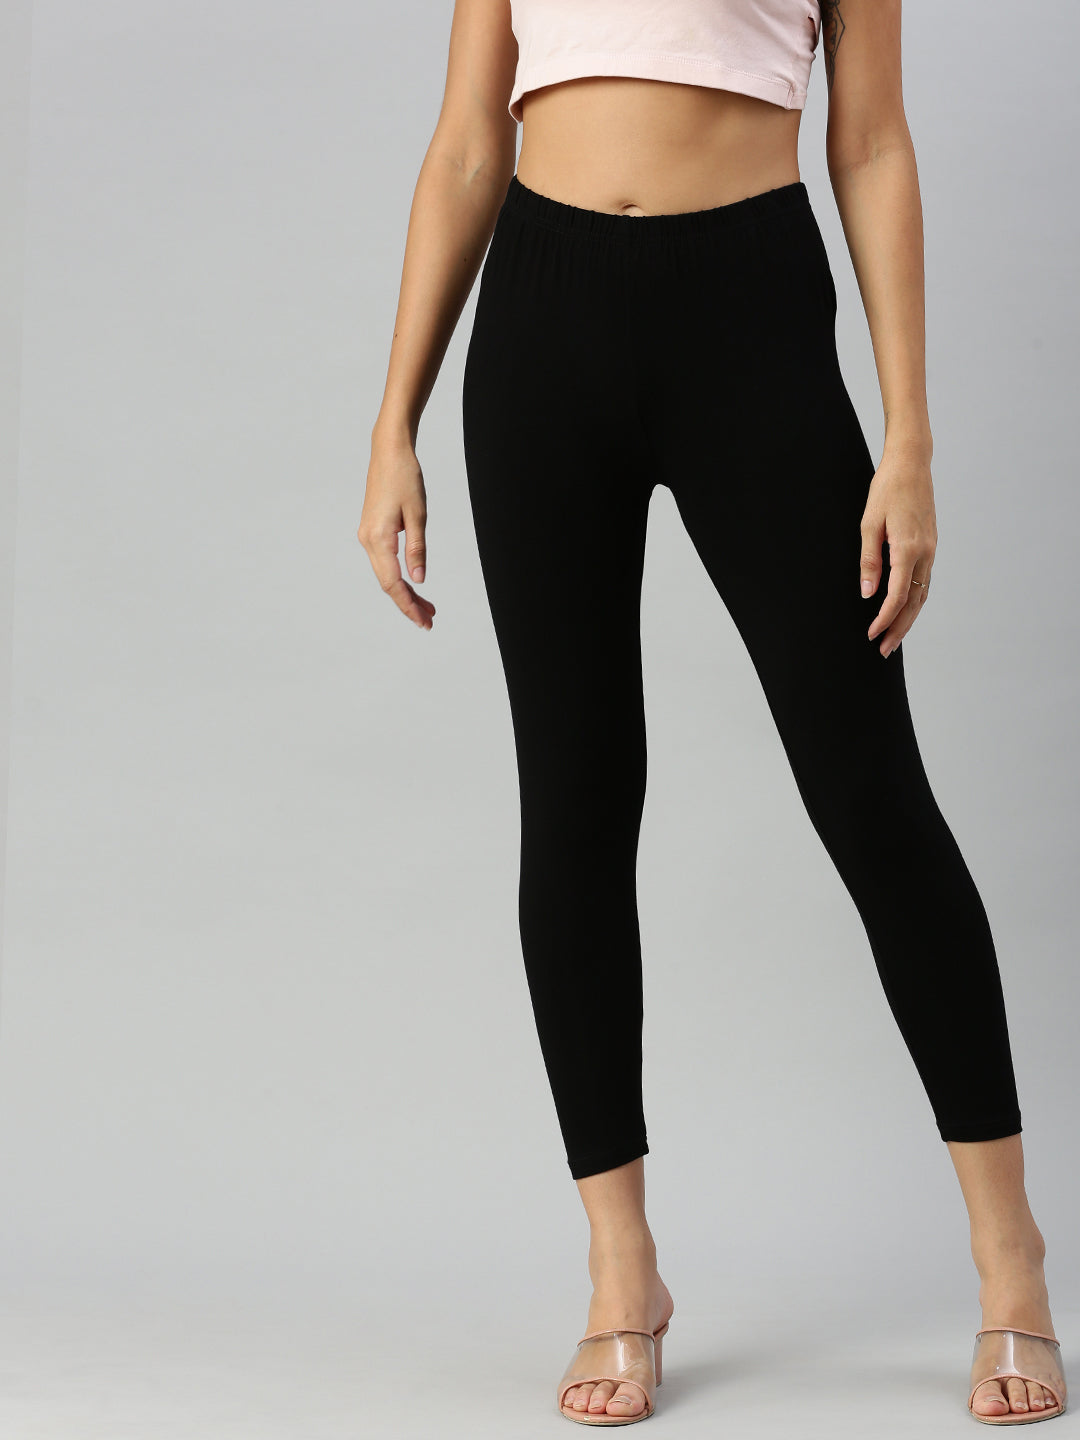 Capri Leggings for Women, Leggings for Women, Leggings with